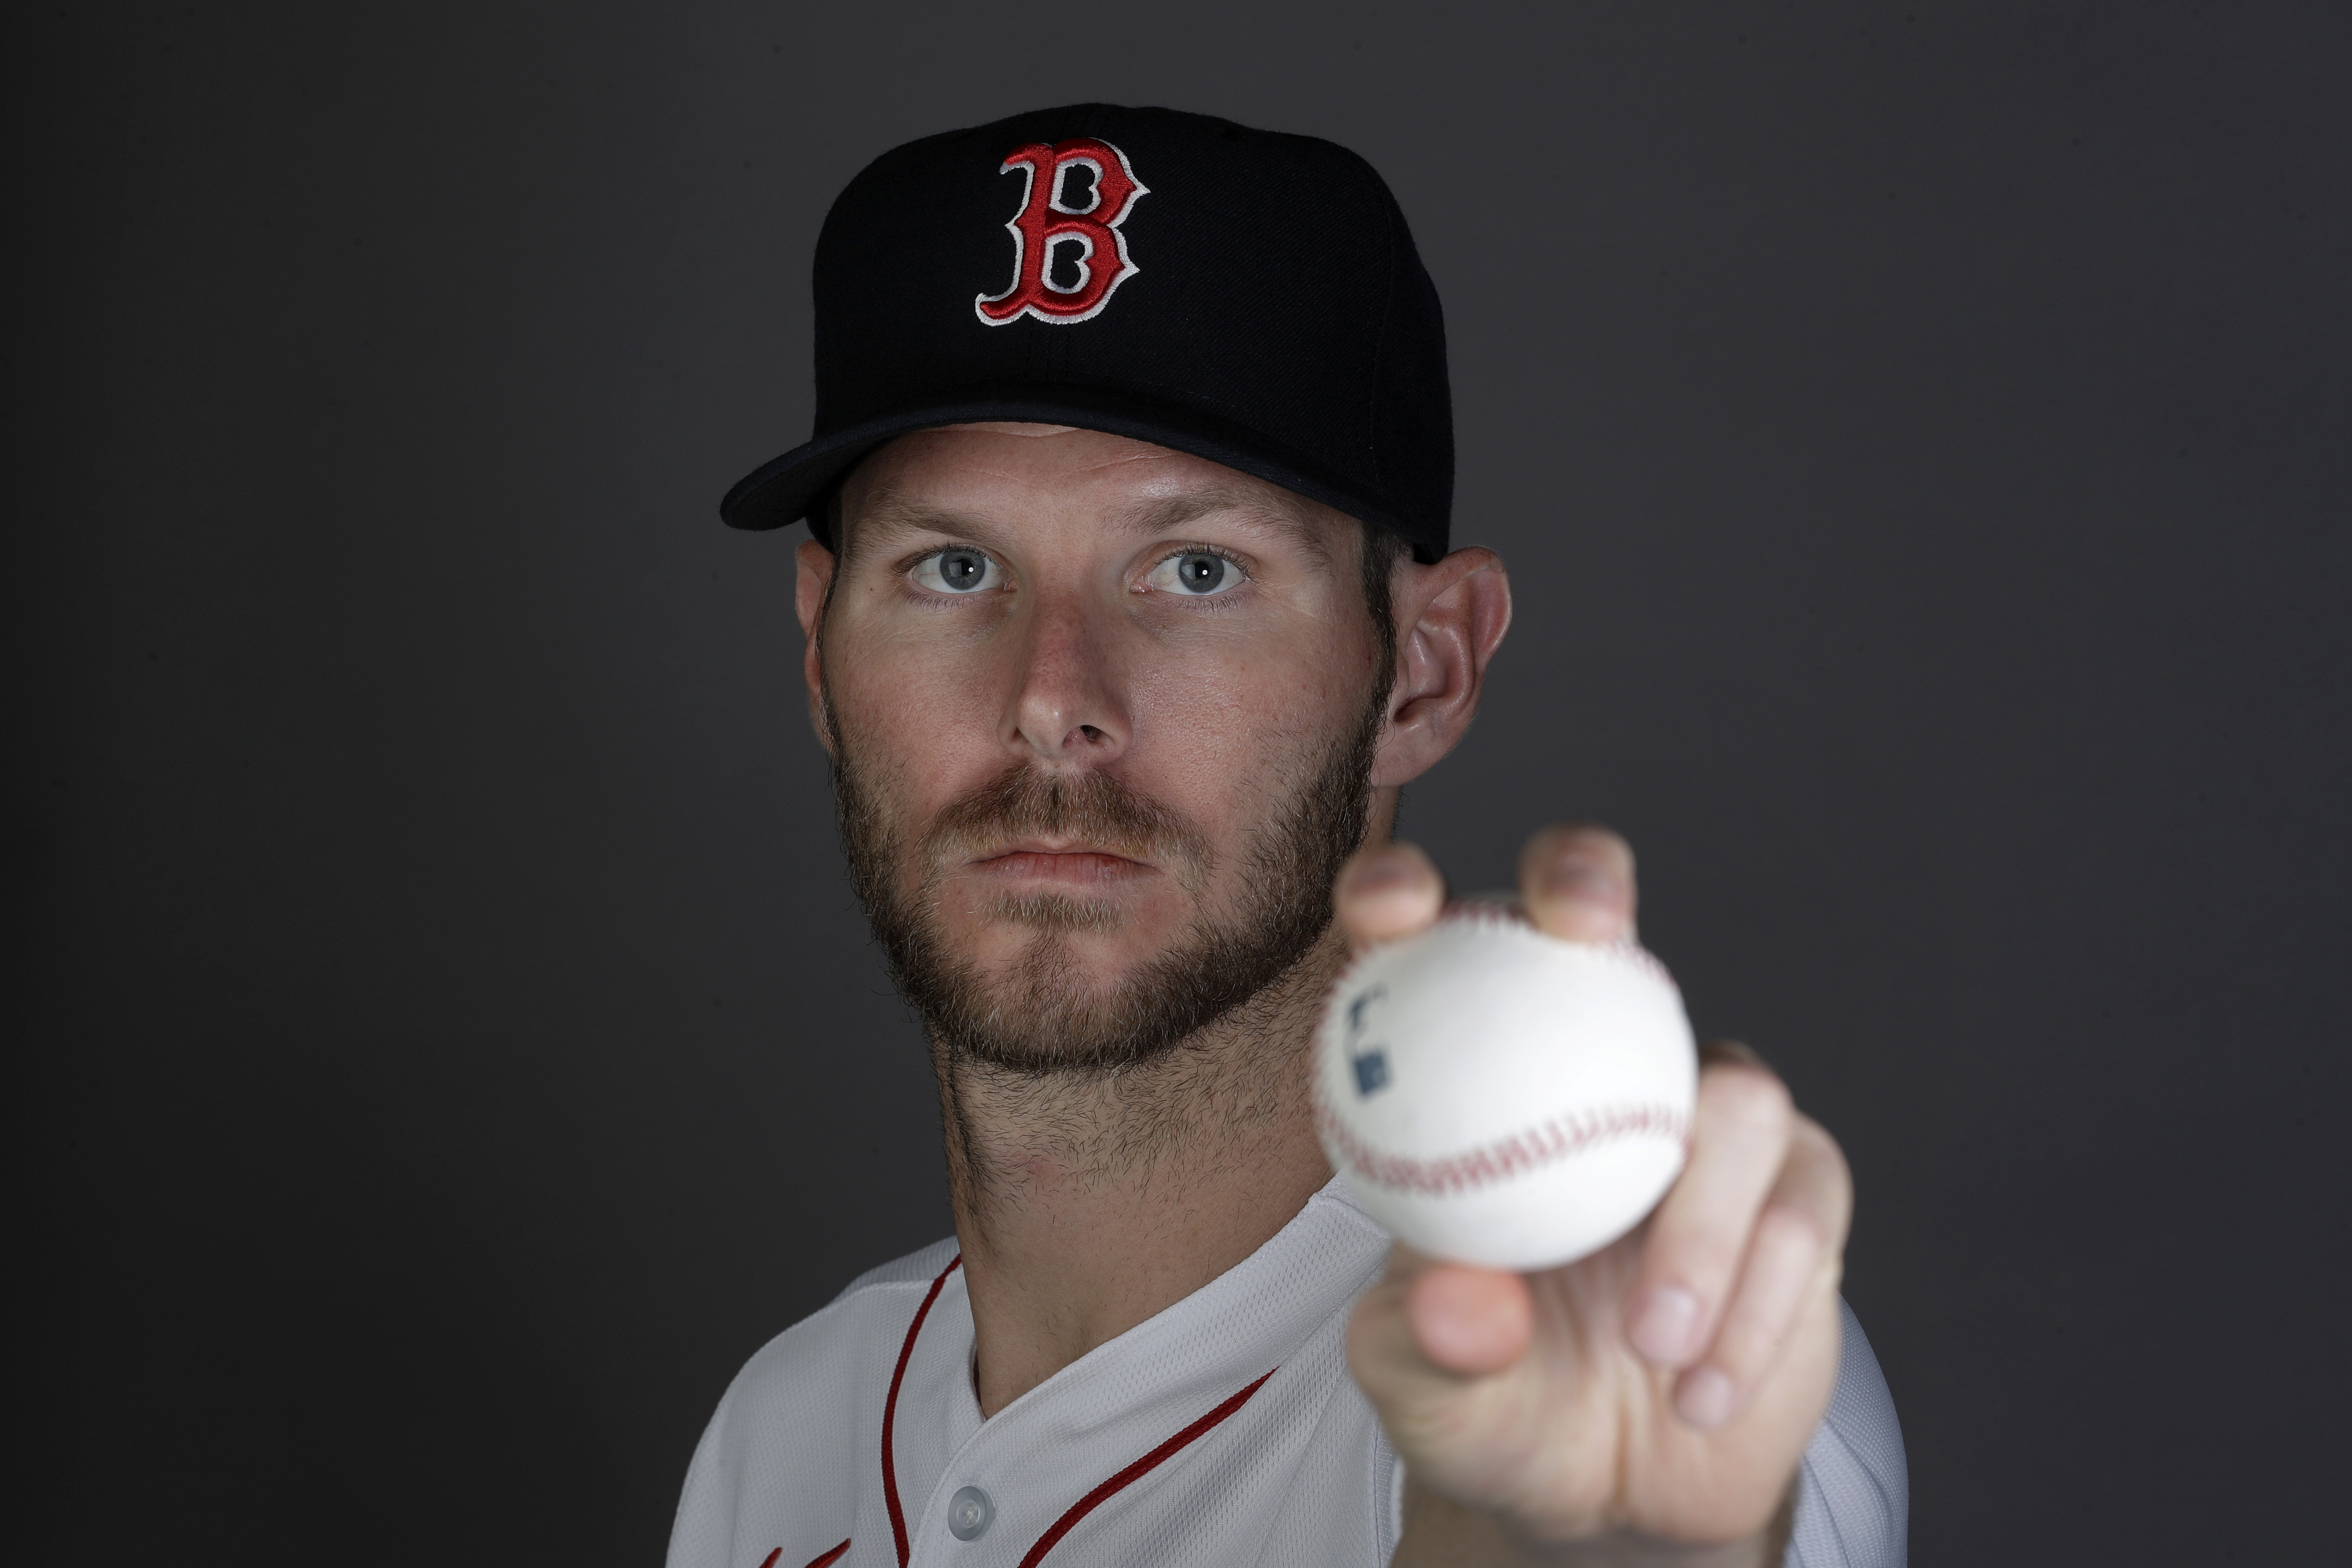 Boston Red Sox's Chris Sale projected for 2.97 ERA, 17 starts, 94 innings  in 2021 in return from Tommy John surgery, per Bill James Handbook 